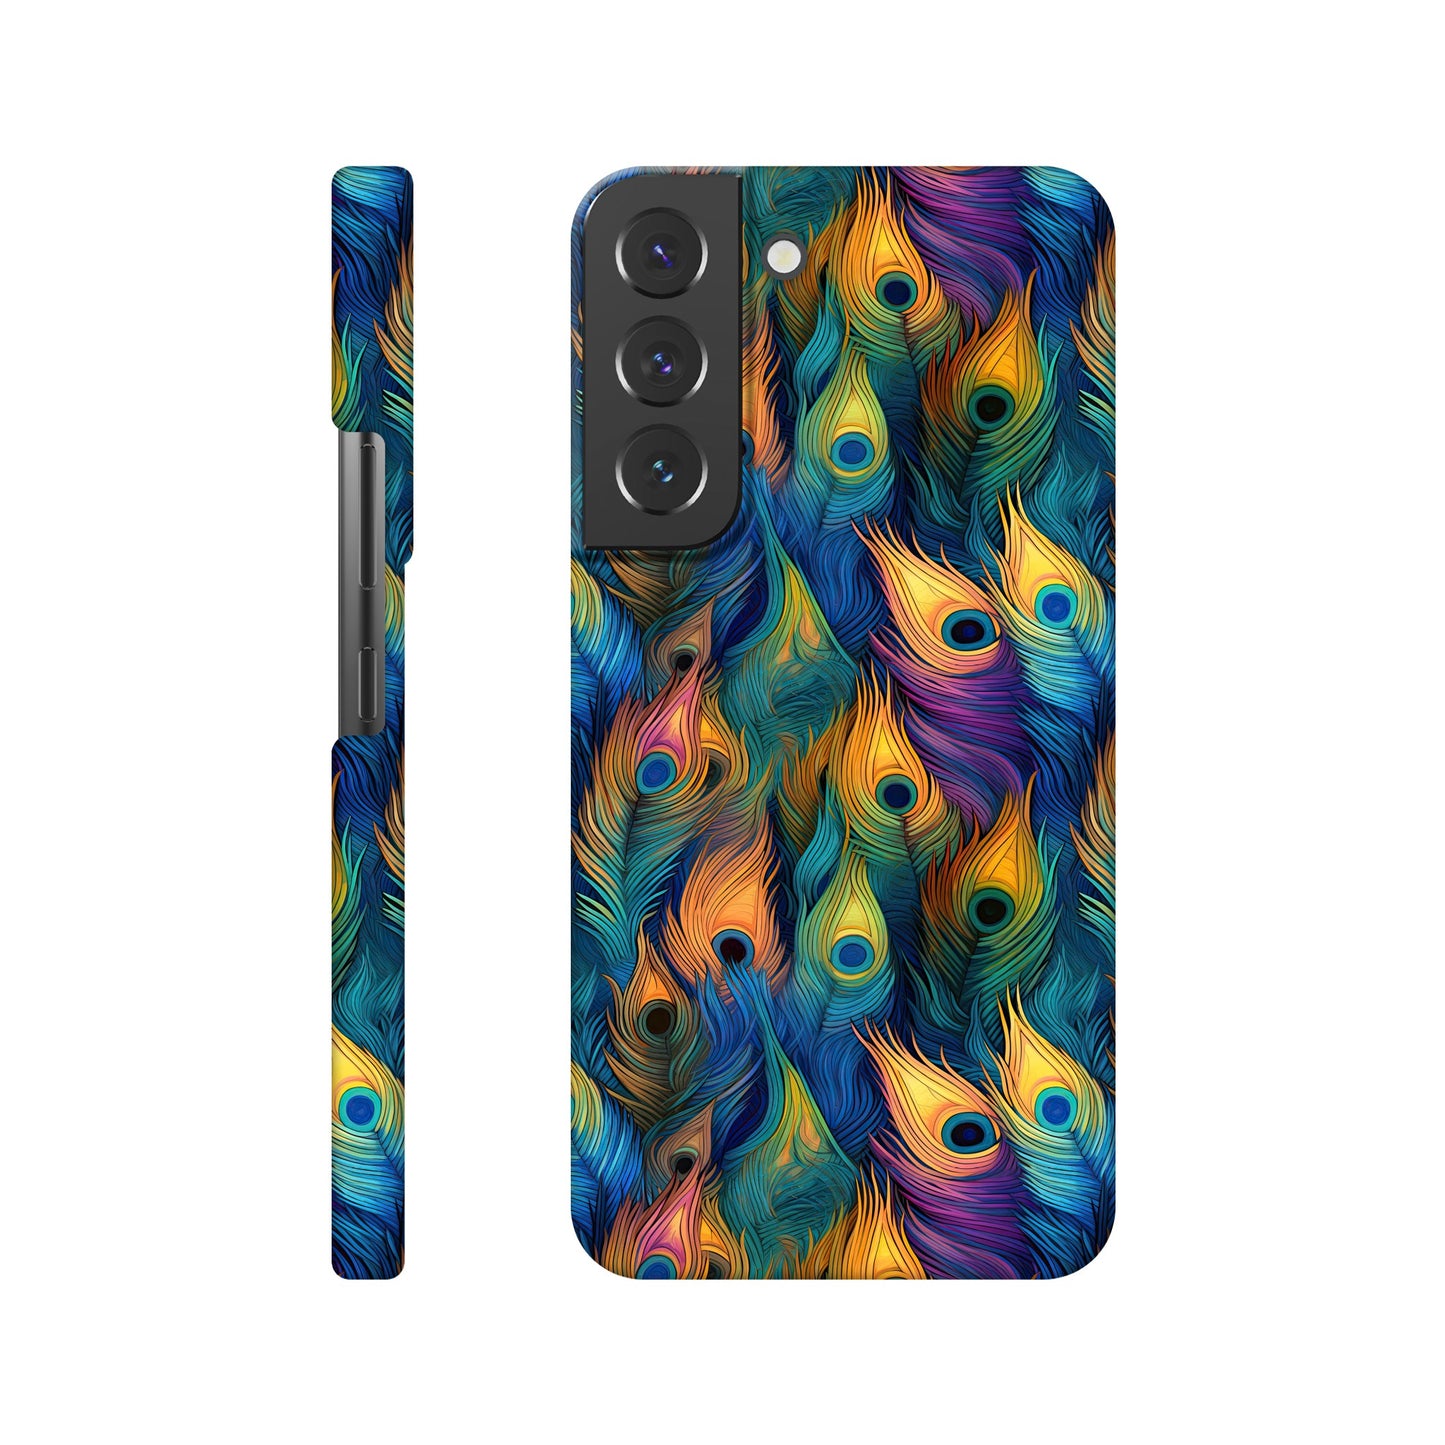 Mobile phone slim case with colorful all over peacock feather print